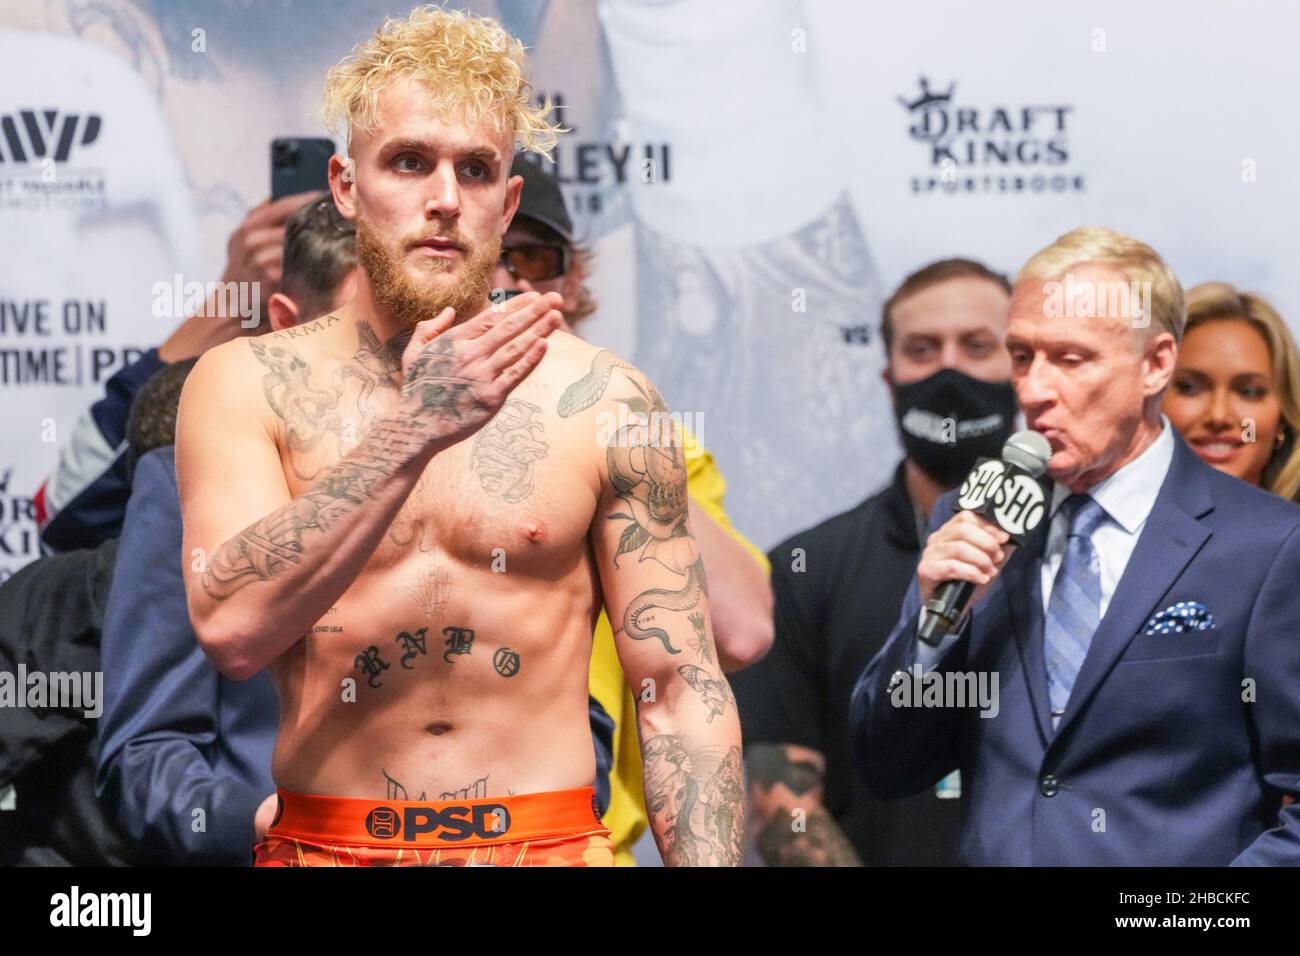 Tampa, Florida, USA. 17th Dec 2021. TAMPA, FL - DECEMBER 17: Jake Paul jumps on the scale on stage at Seminole Hard Rock Tampa for Jake Paul vs. Tyron Woodley 2 - Media Week on December 17, 2021 in Tampa, Florida, United States. (Photo by Louis Grasse/PxImages) Credit: Px Images/Alamy Live News Stock Photo